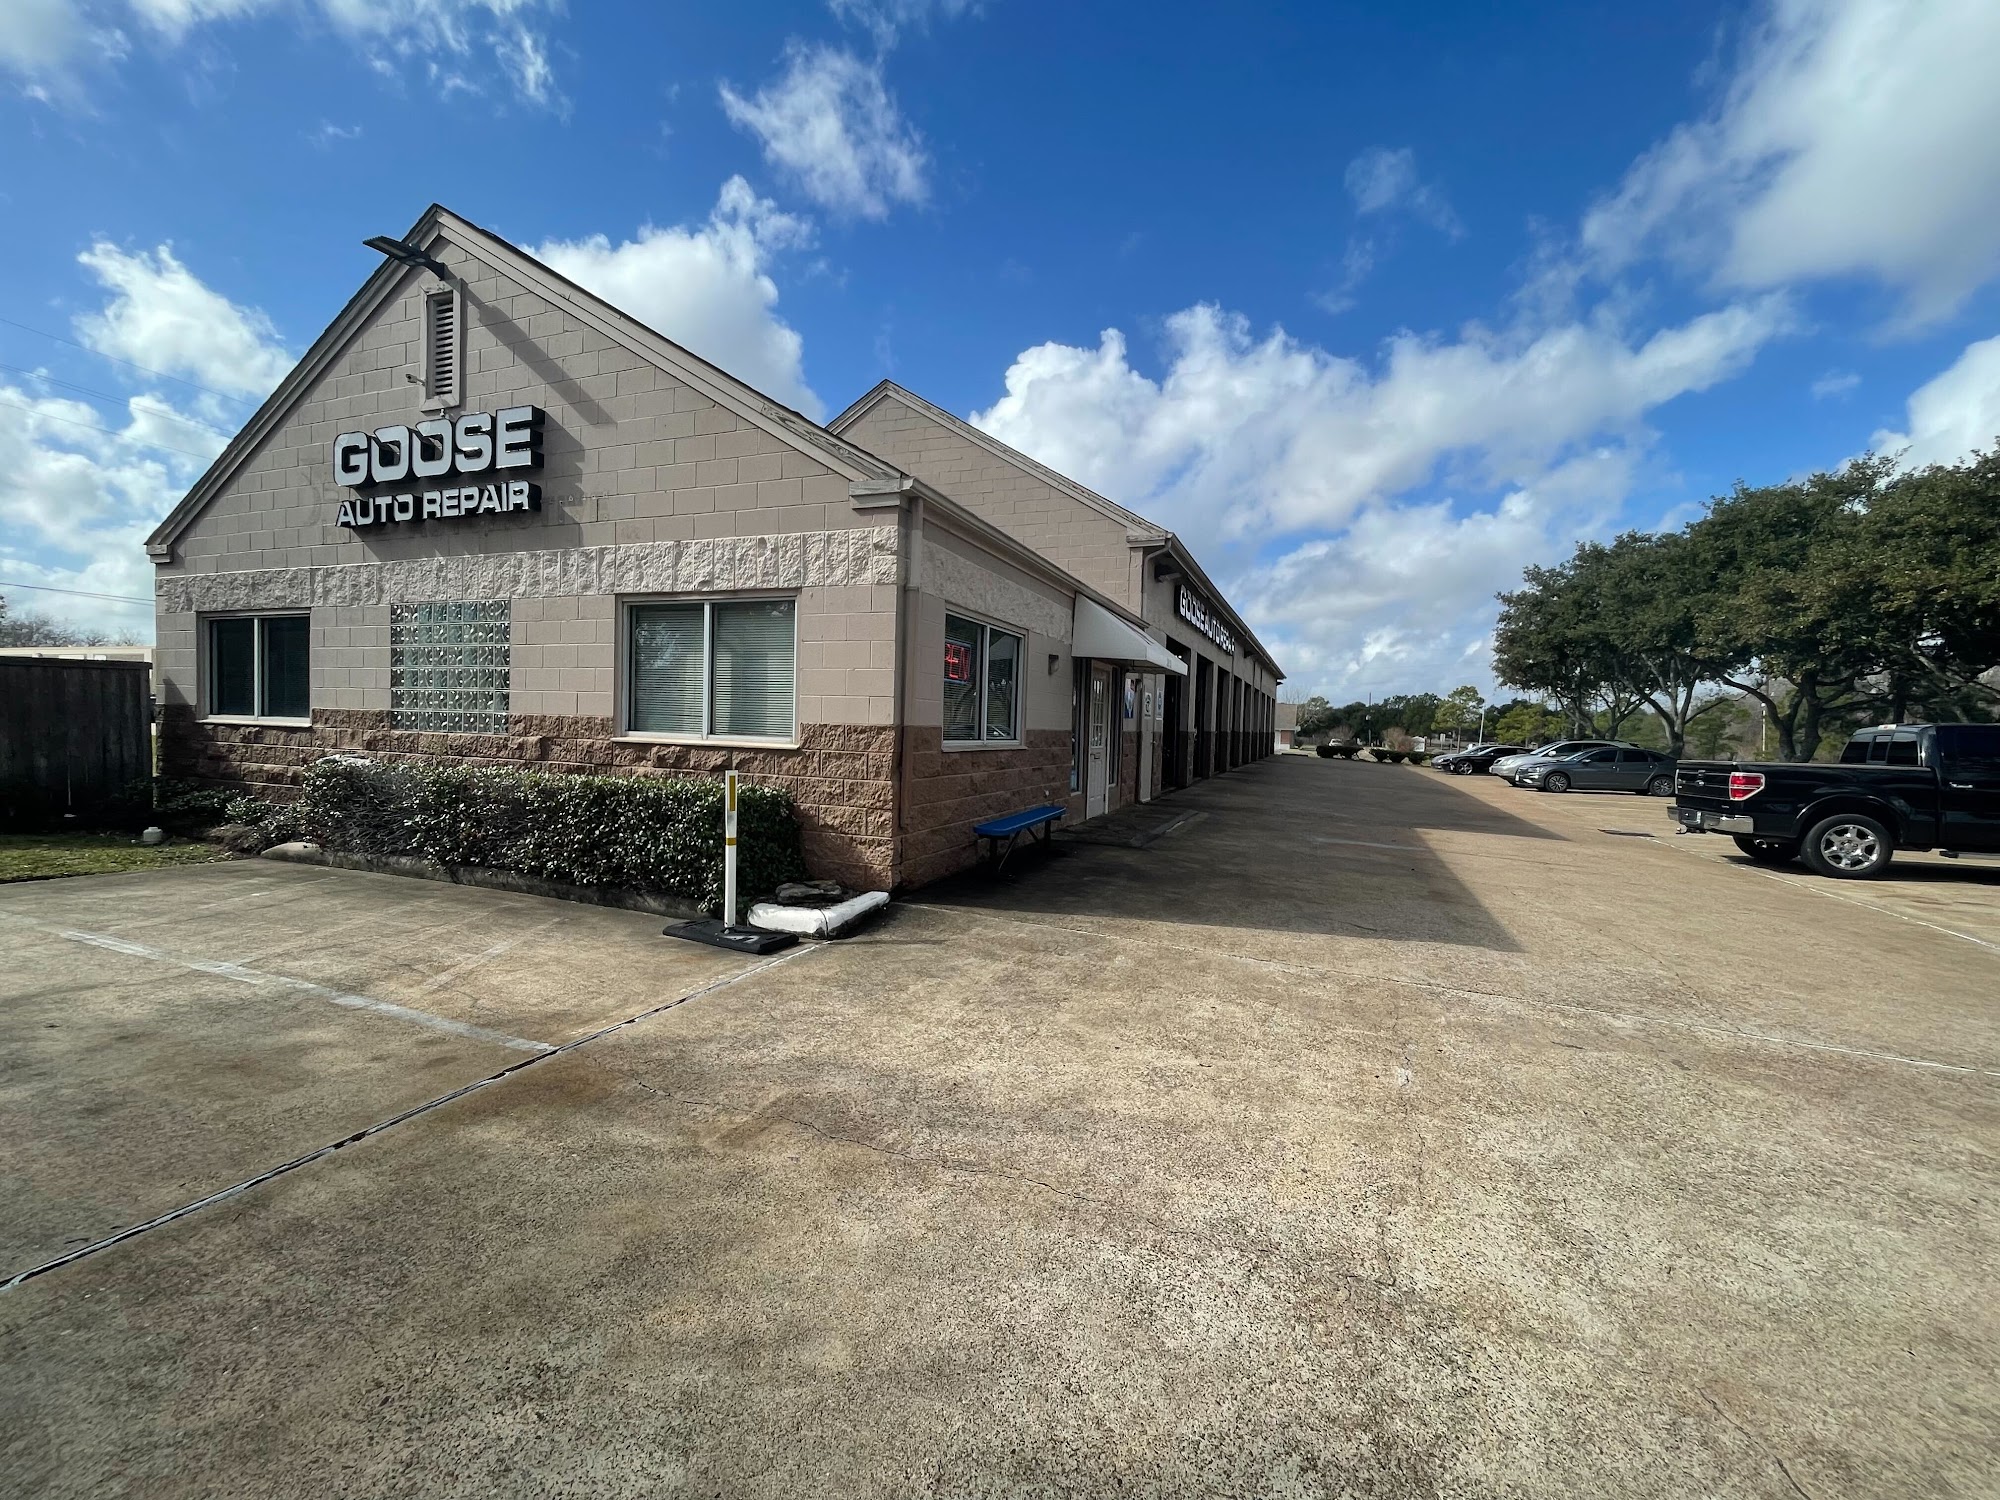 Goose Auto Repair- Formerly Hope Automotive